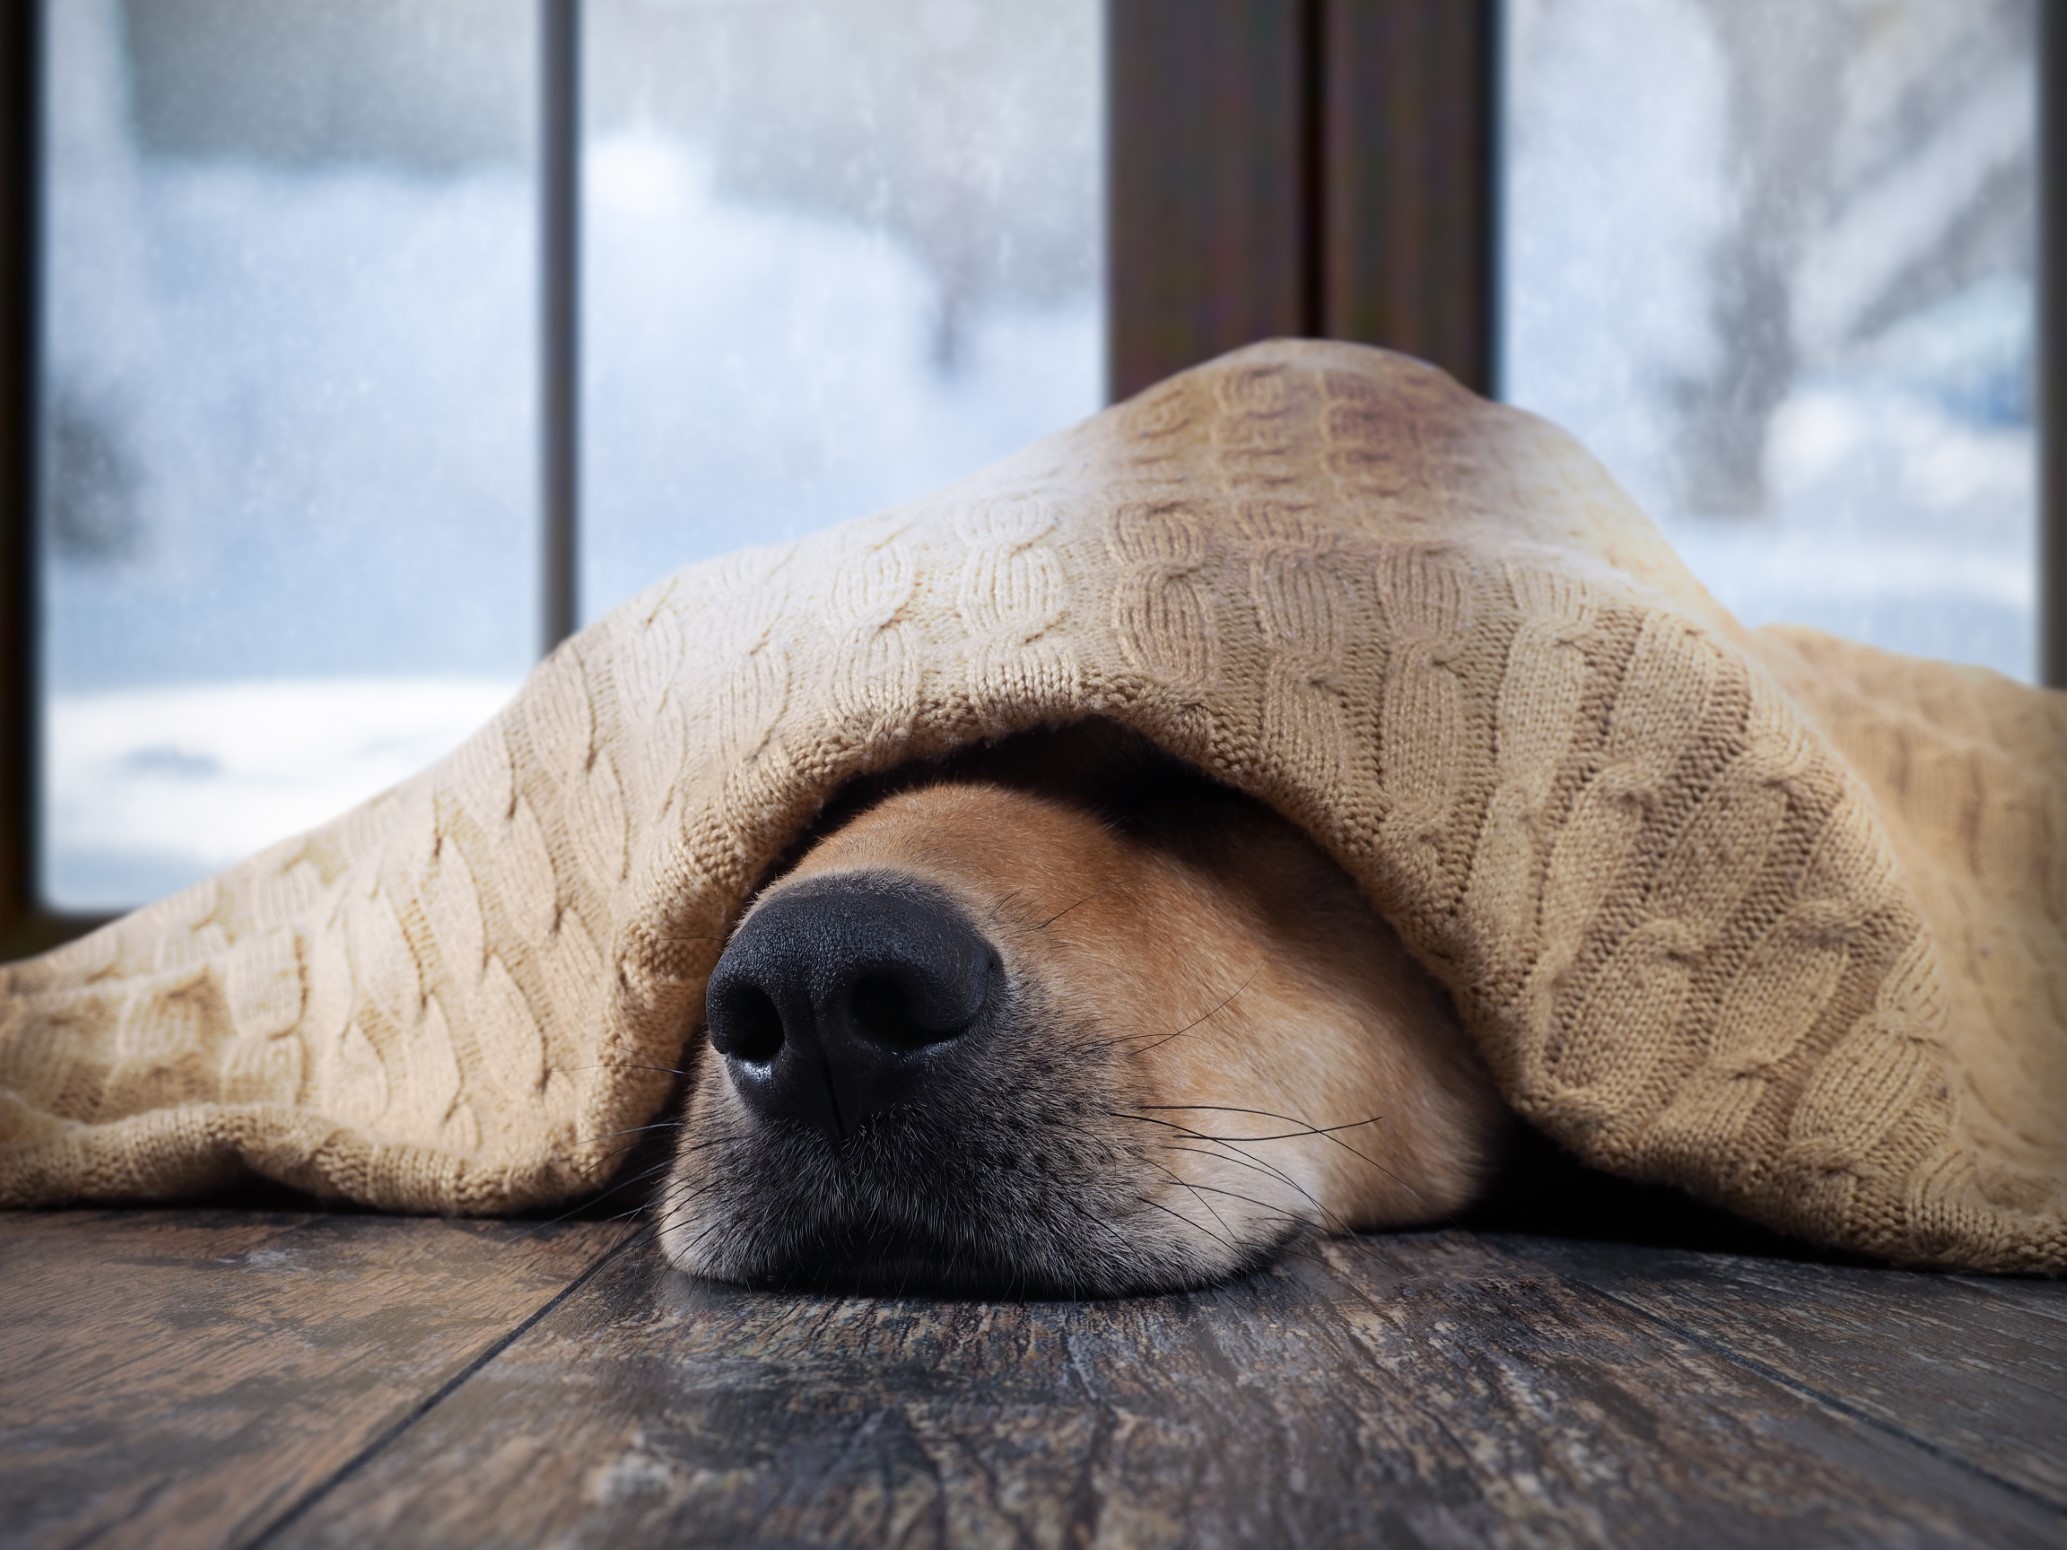 Dog with a blanket. Stay warm fuel.